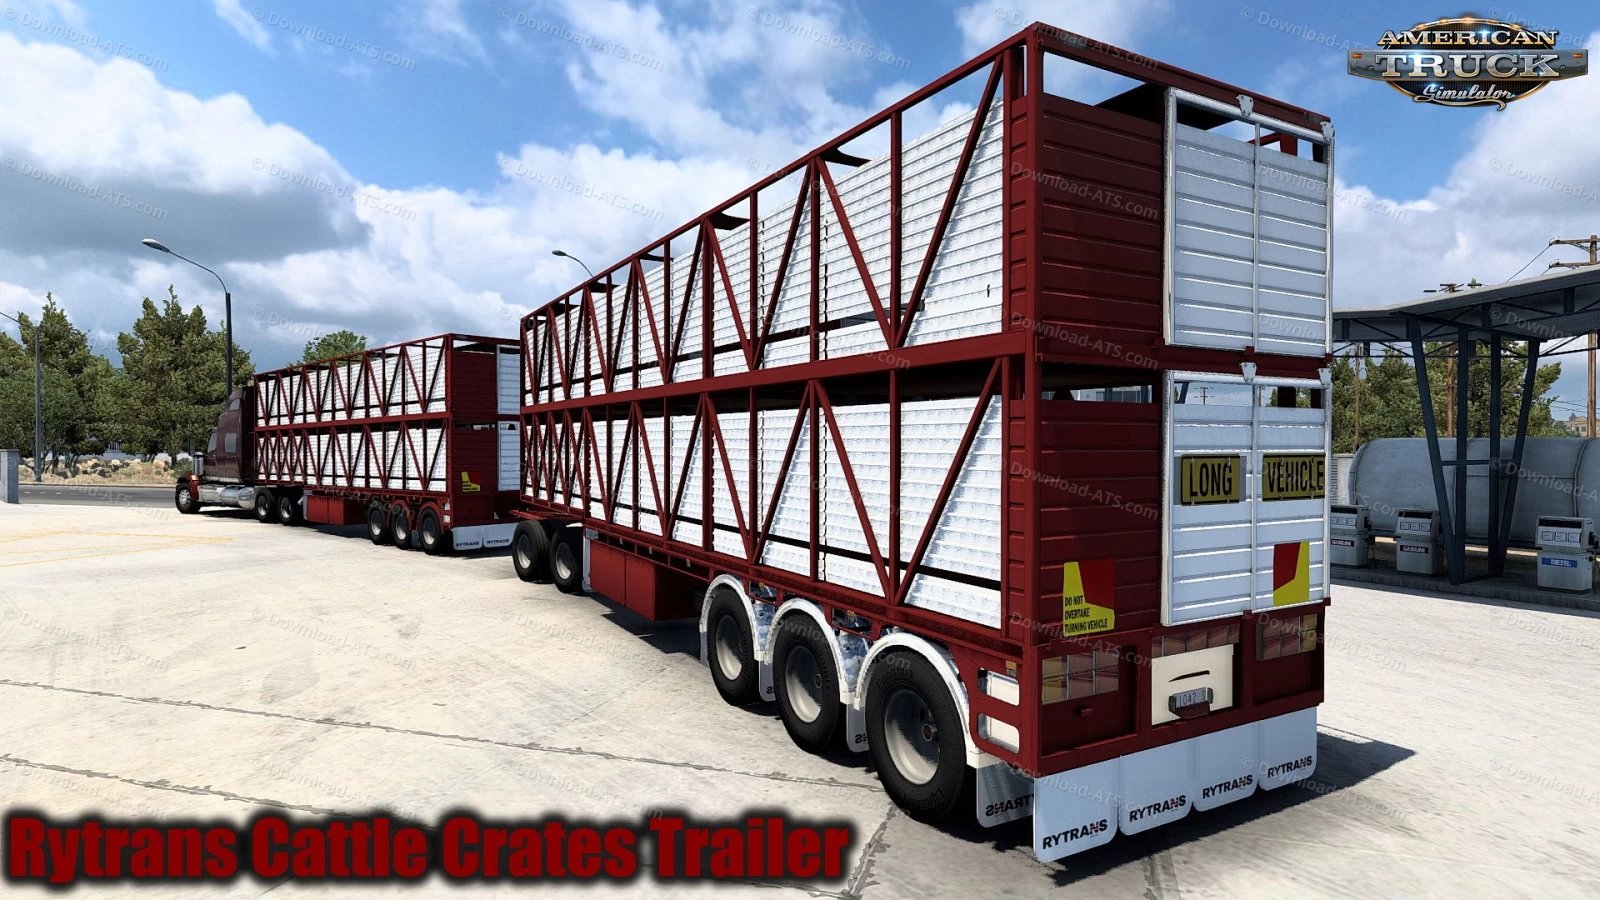 Rytrans Cattle Crates Trailer v3.0 (1.46.x) for ATS